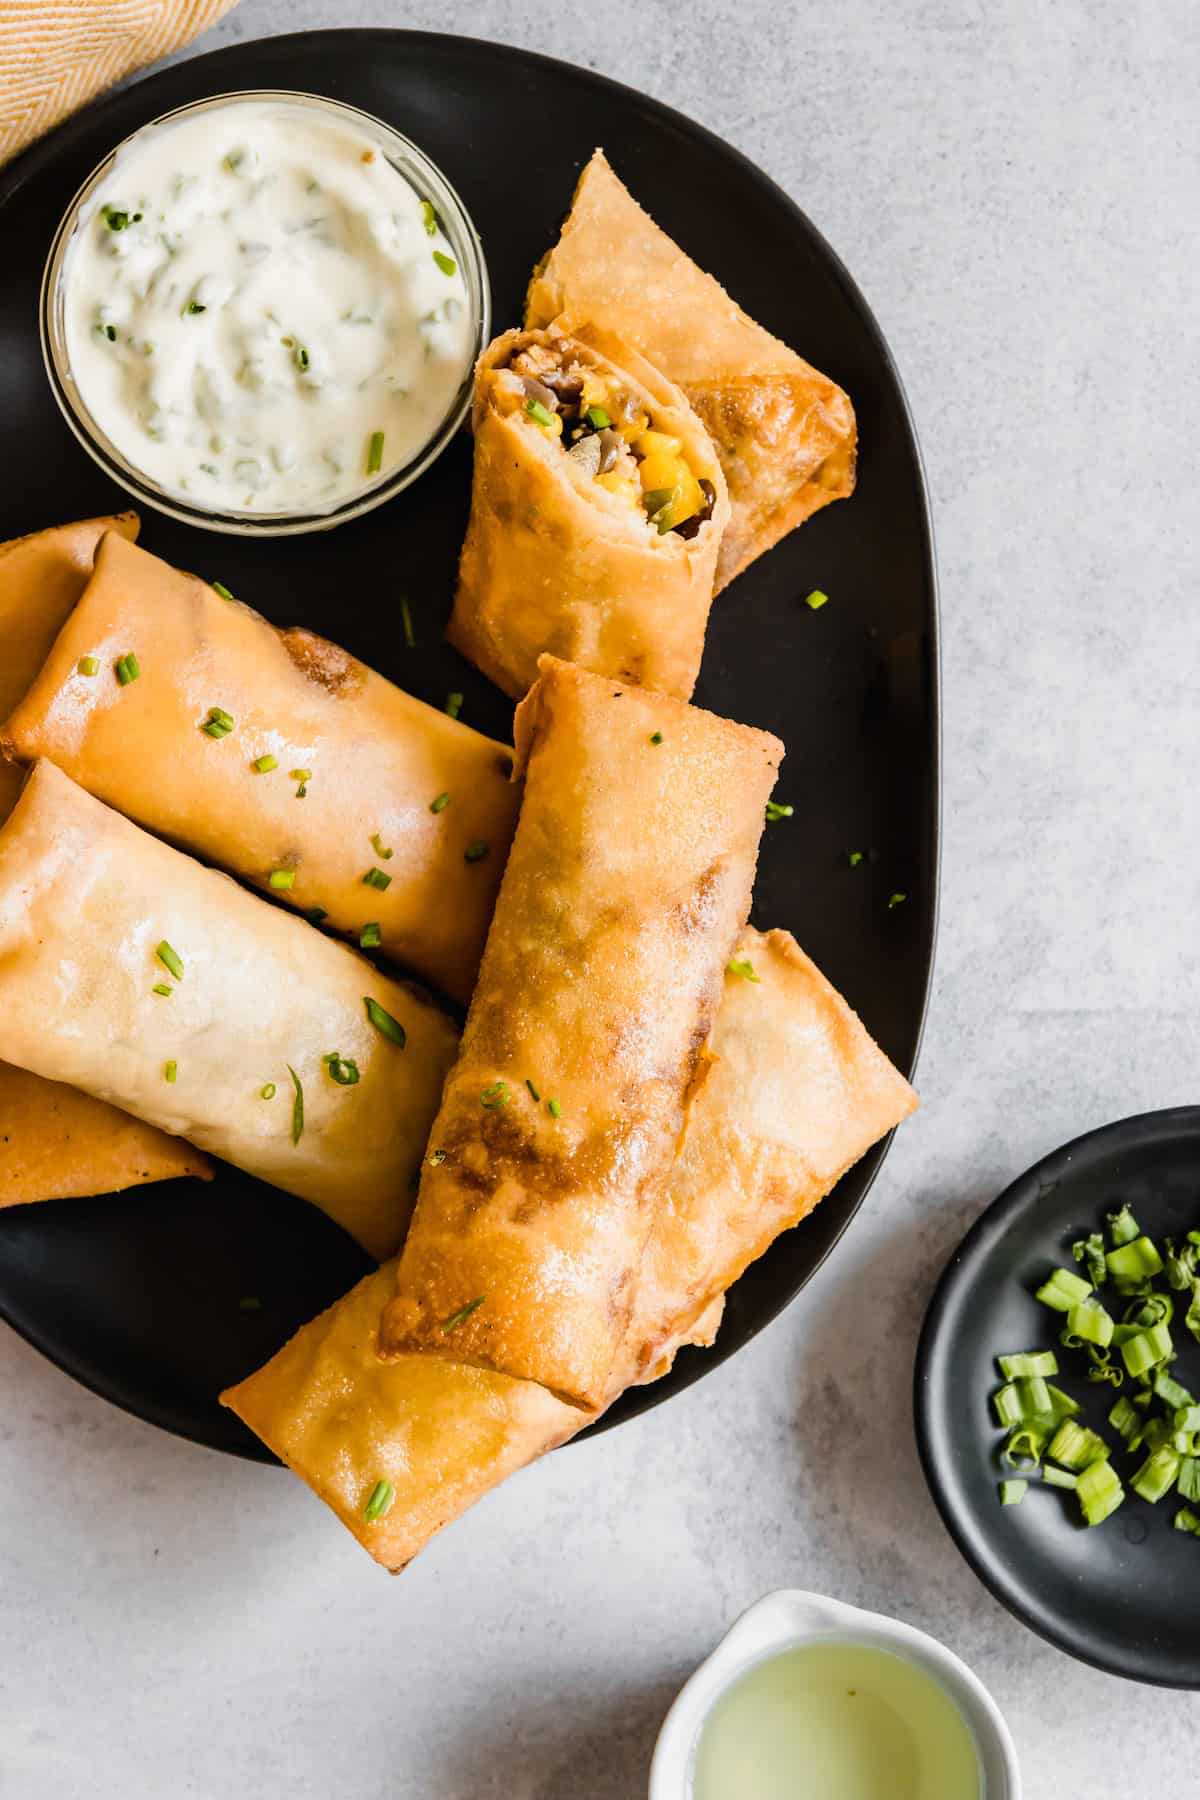 tex mex egg rolls arranged on a black plate with a white sauce in a bowl.